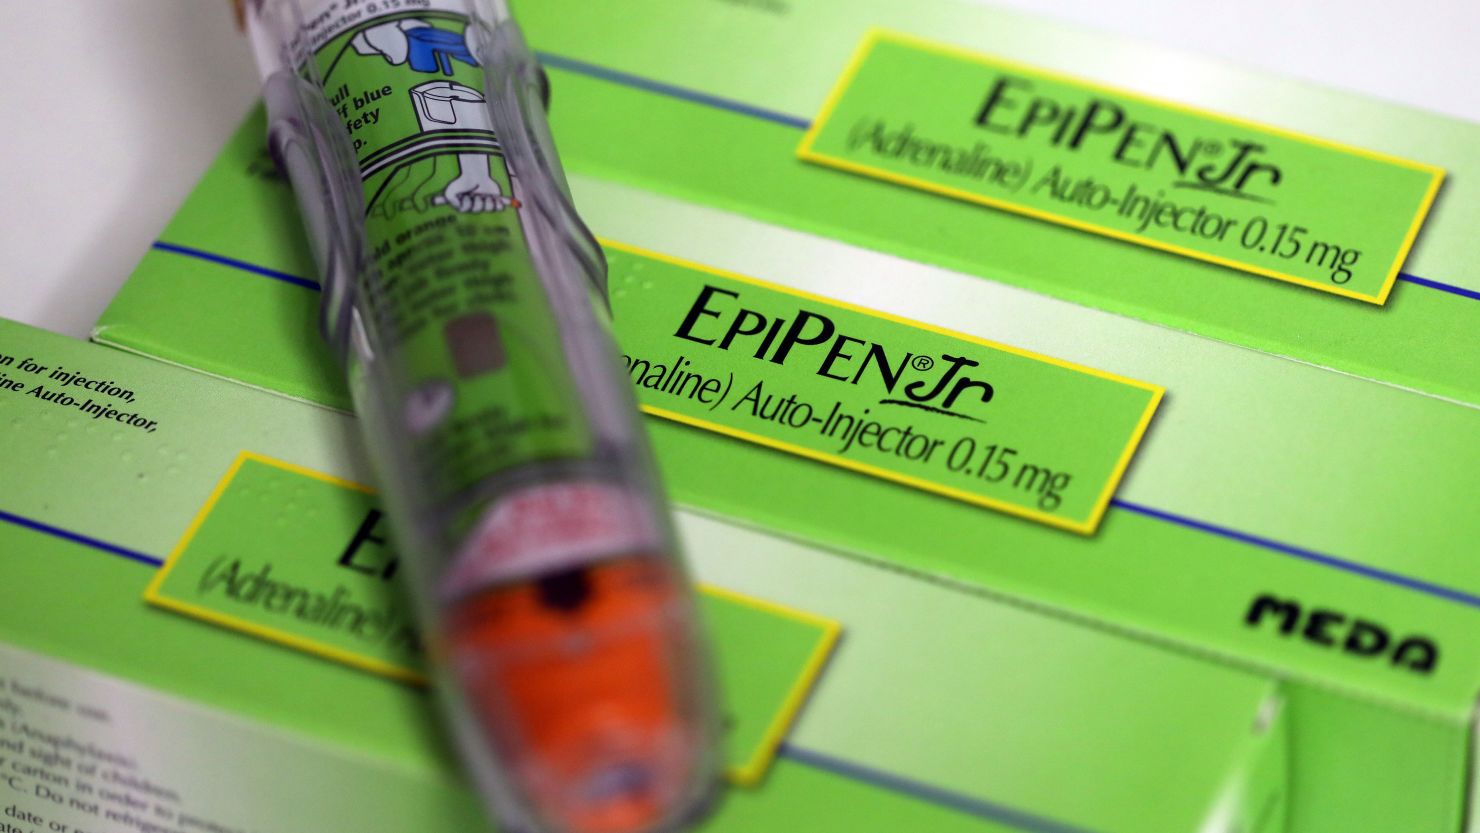 An Epipen Junior epinephrine auto-injector, produced by Meda AB, sits on a pharmacy counter in this arranged photograph in London, U.K., on Thursday, Dec. 29, 2016. The rapid pace of innovation among drugmakers may continue to be overshadowed by broader investment themes, such as the switch away from defensive stocks into more cyclical industries, during 2017, according to Bloomberg Intelligence. Photographer: Chris Ratcliffe/Bloomberg via Getty Images